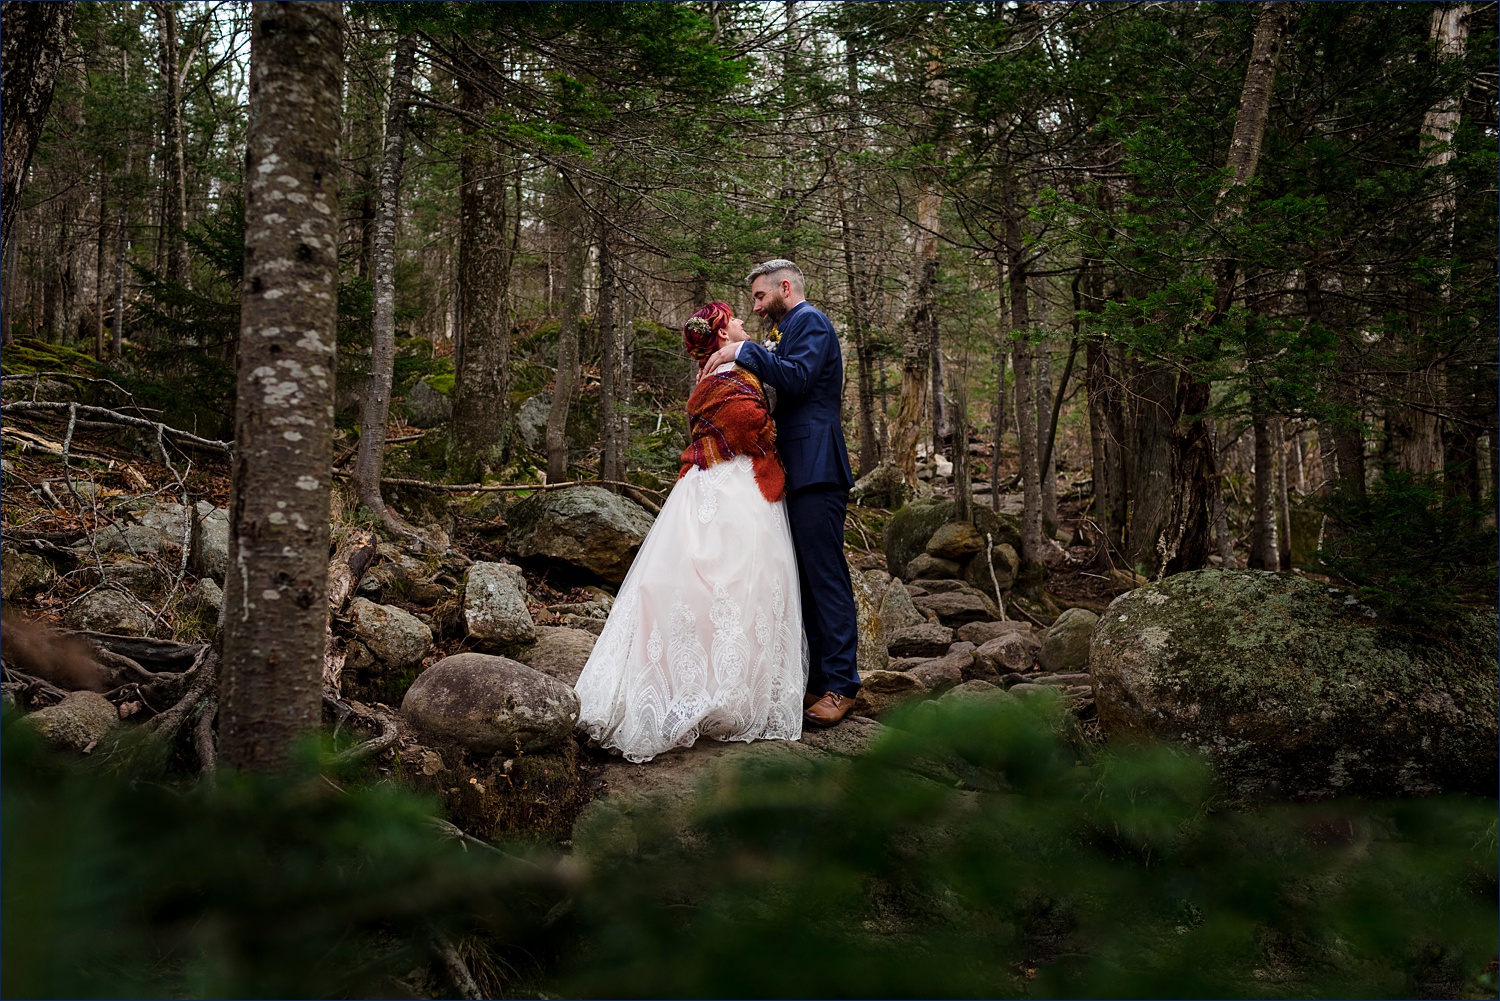 The elopement couple hold each other tight out in the woods of Gorham, NH